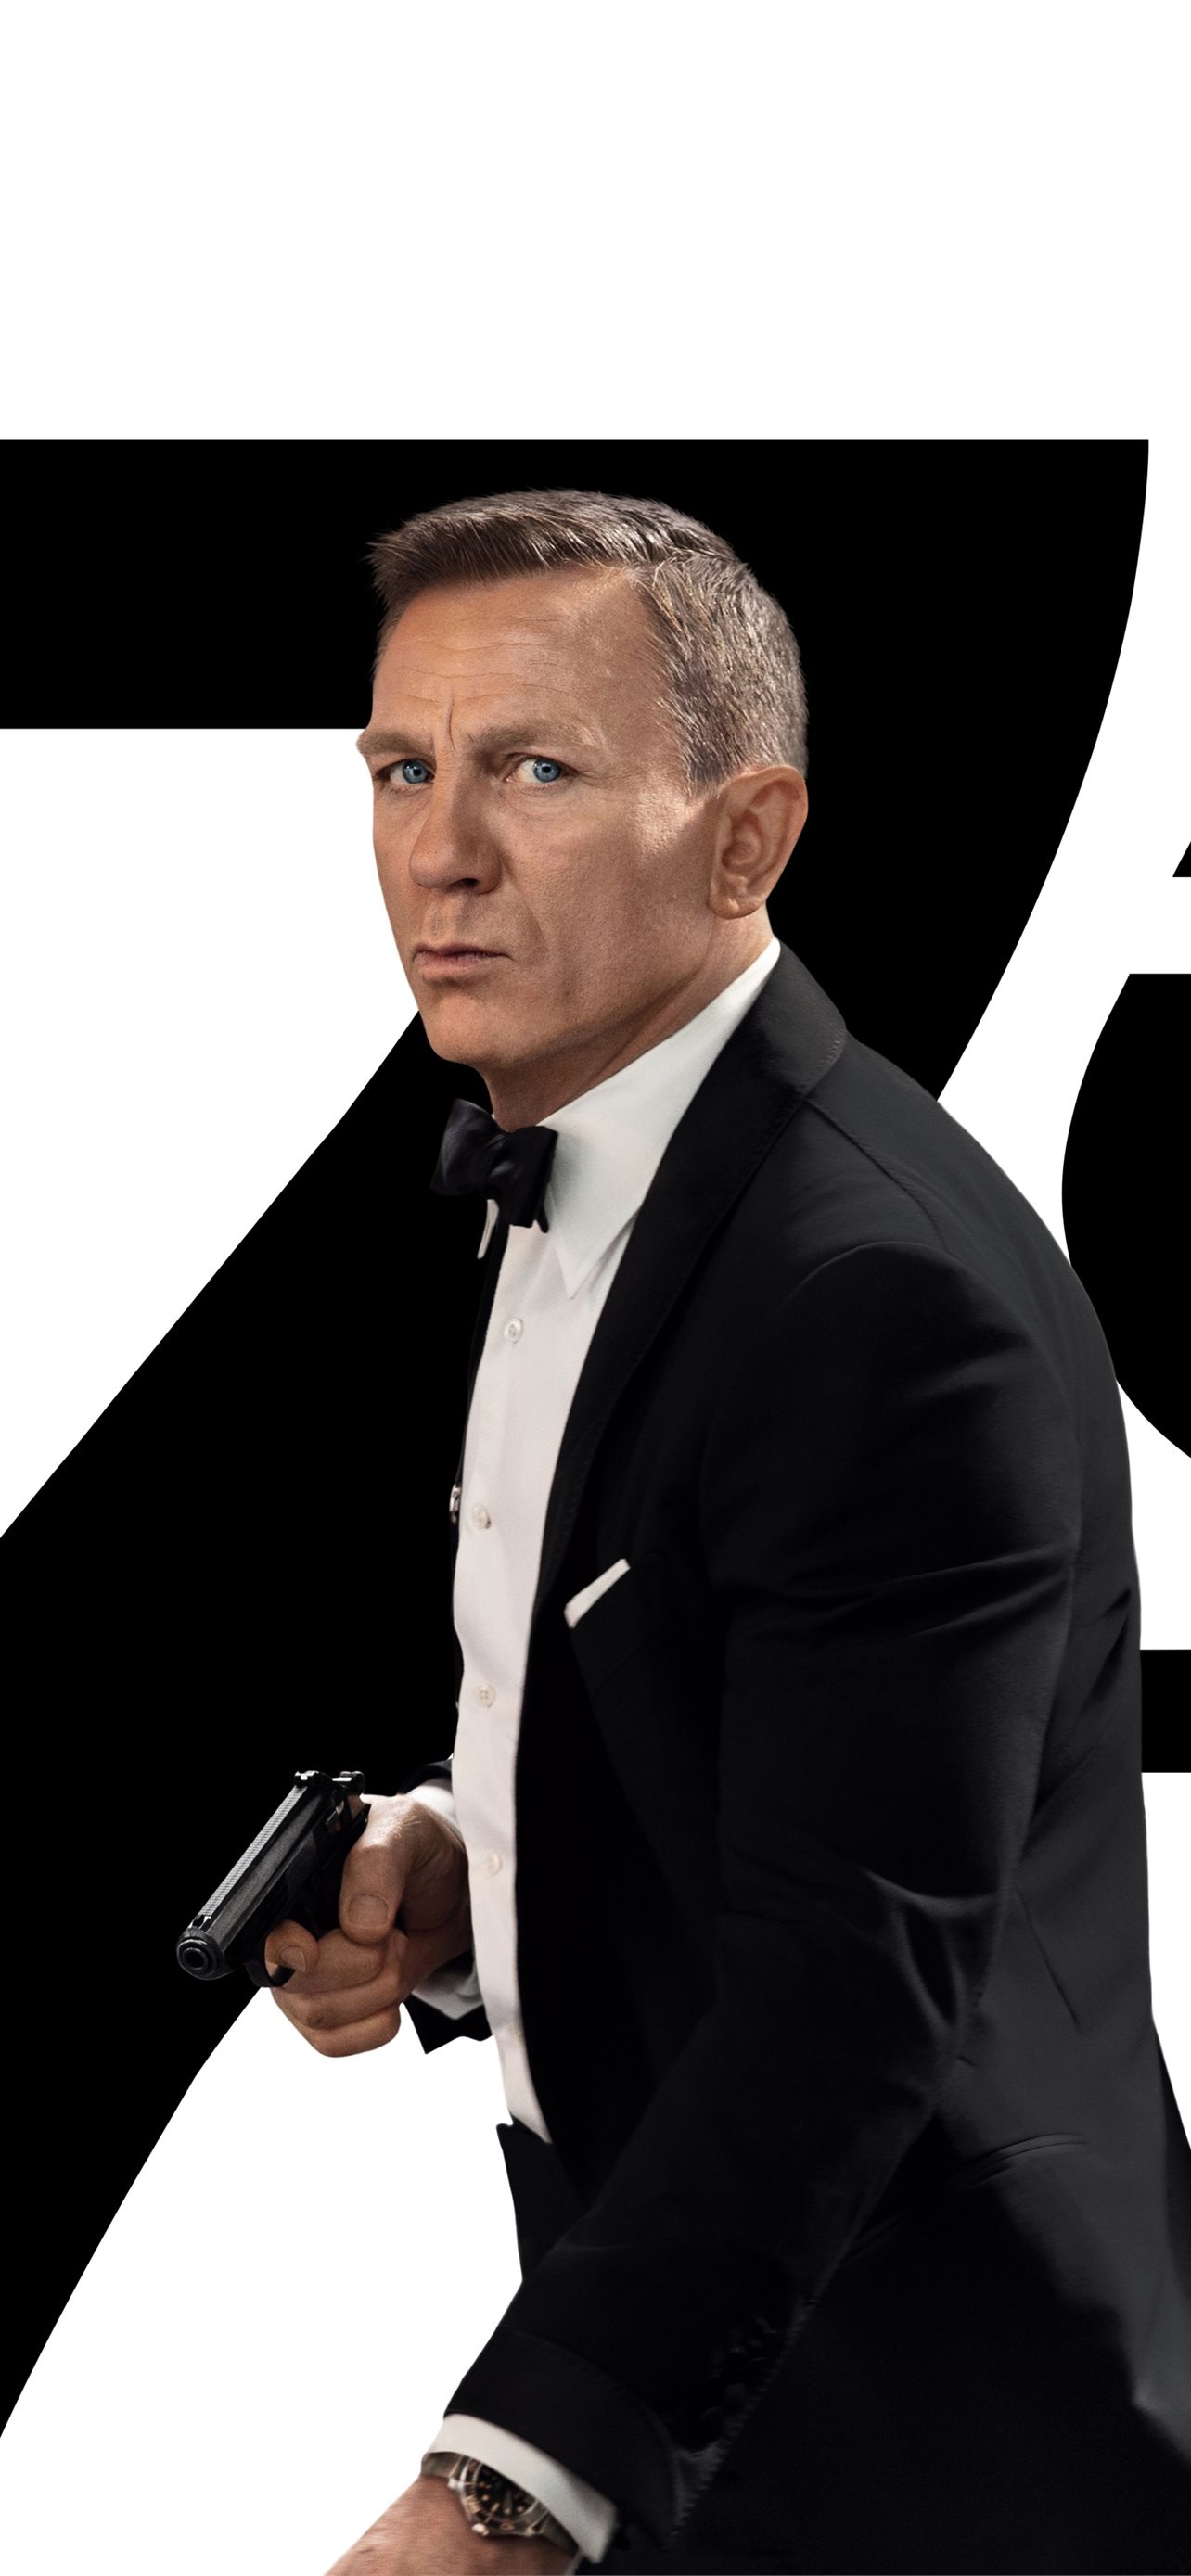 Daniel Craig: One of the UK's best-known Hollywood actors, The iconic role of James Bond. 1290x2780 HD Background.